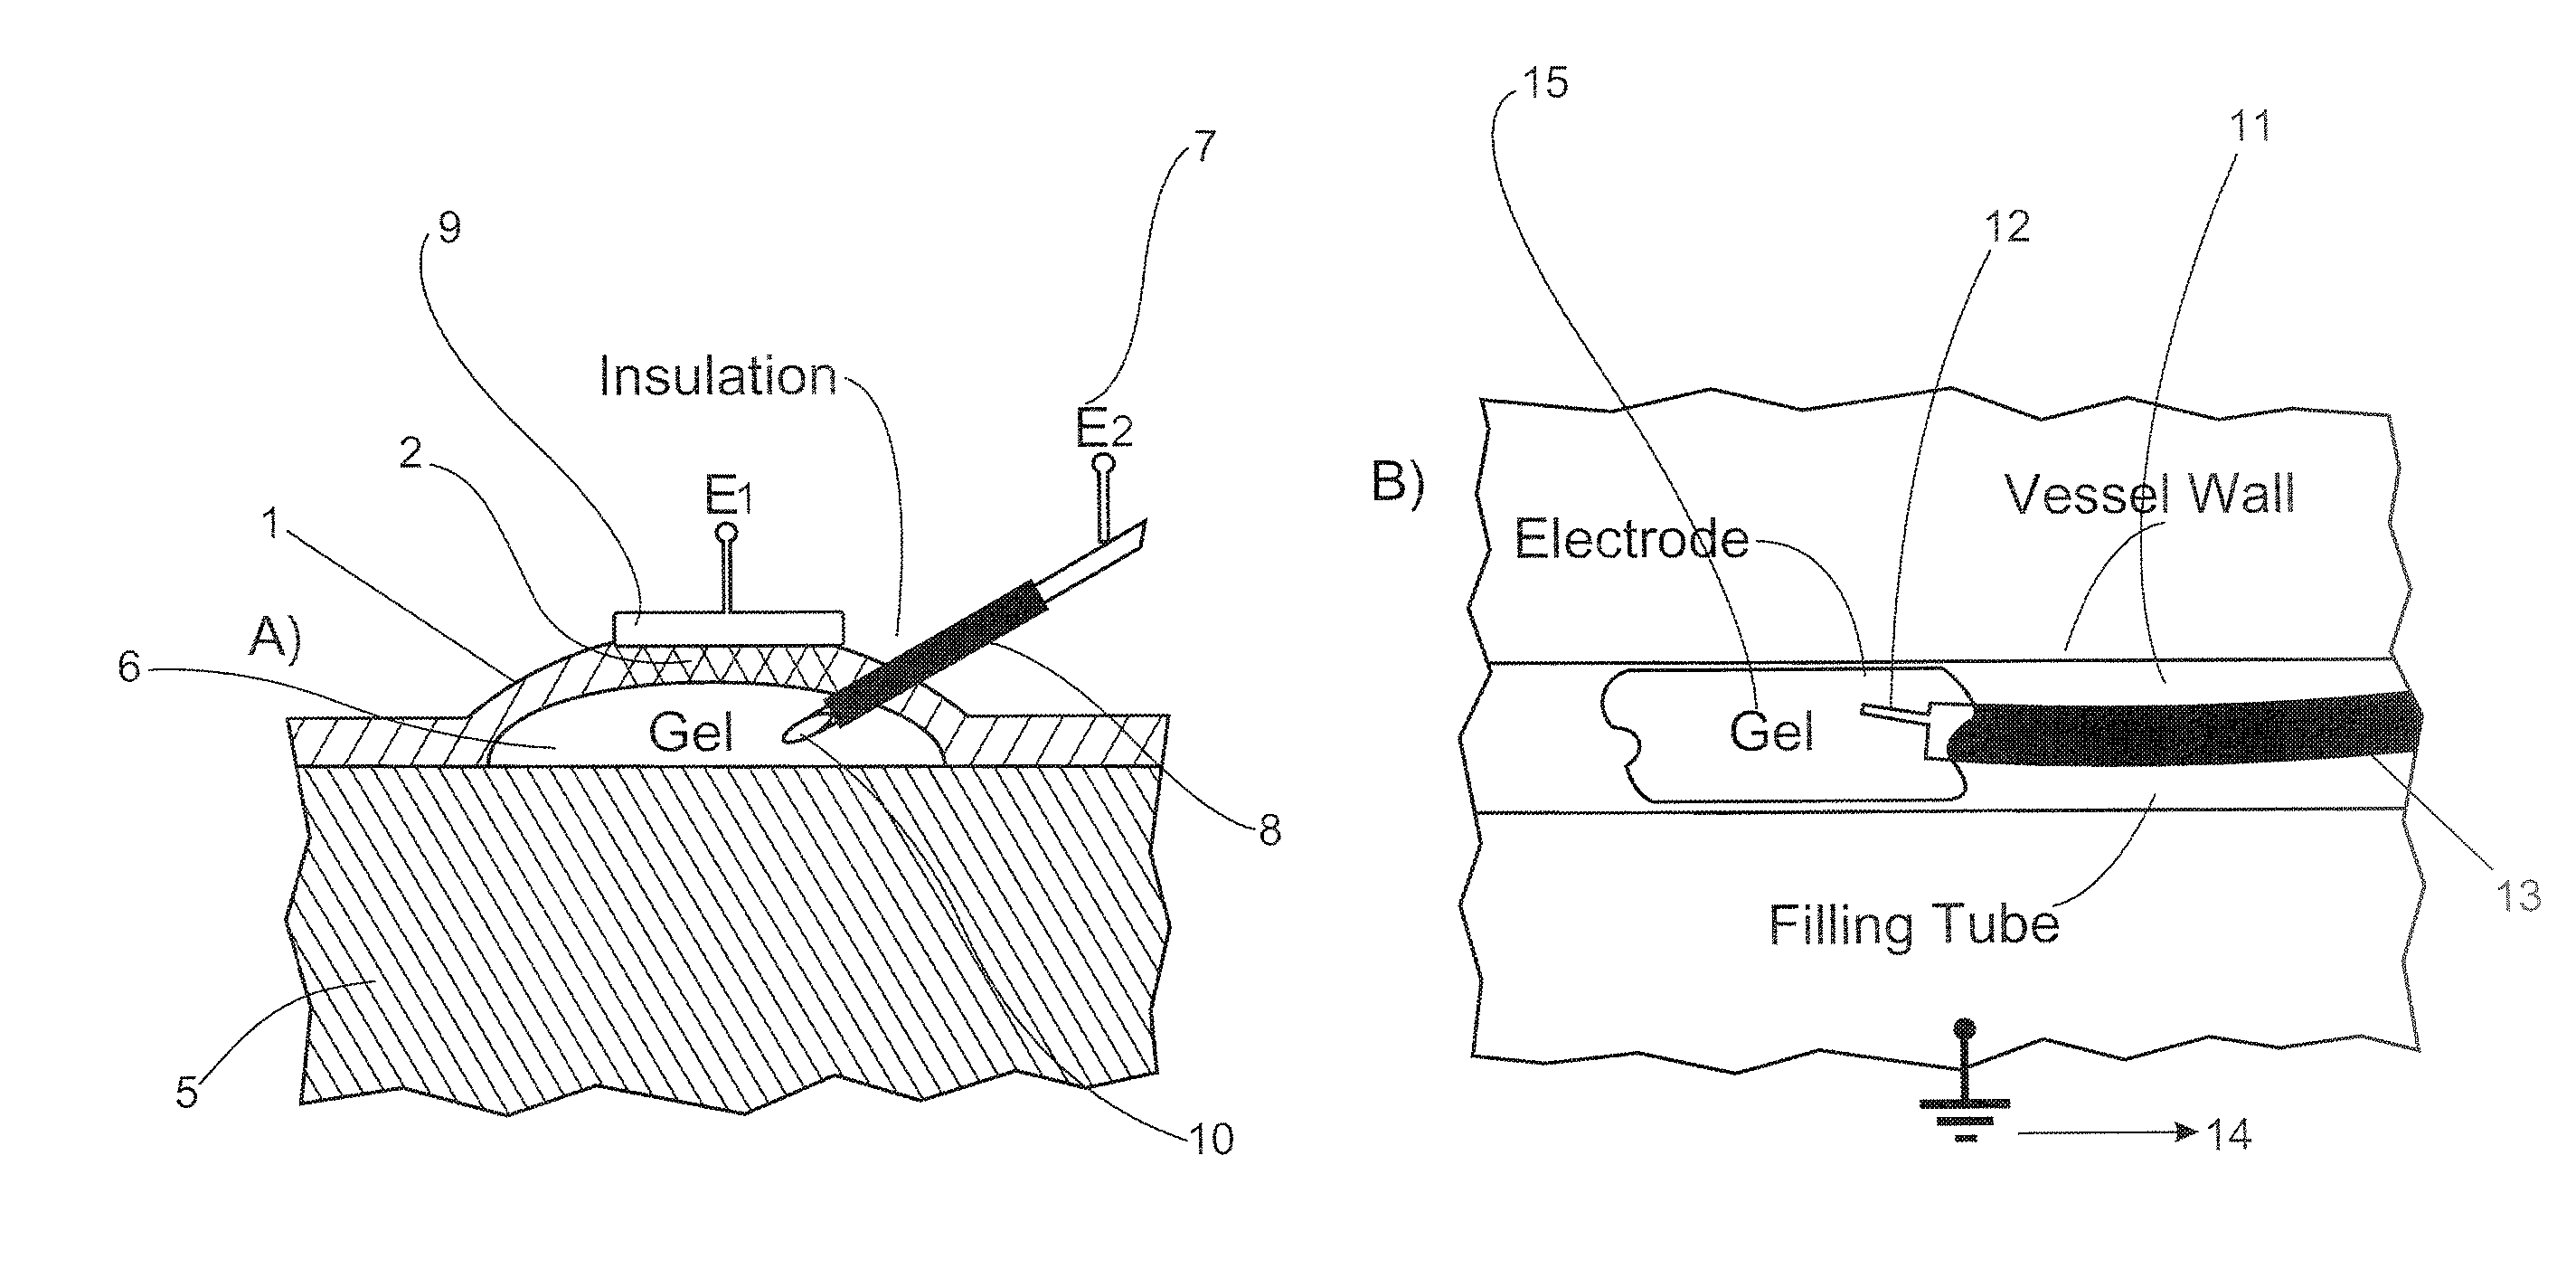 Gels with predetermined conductivity used in electroporation of tissue